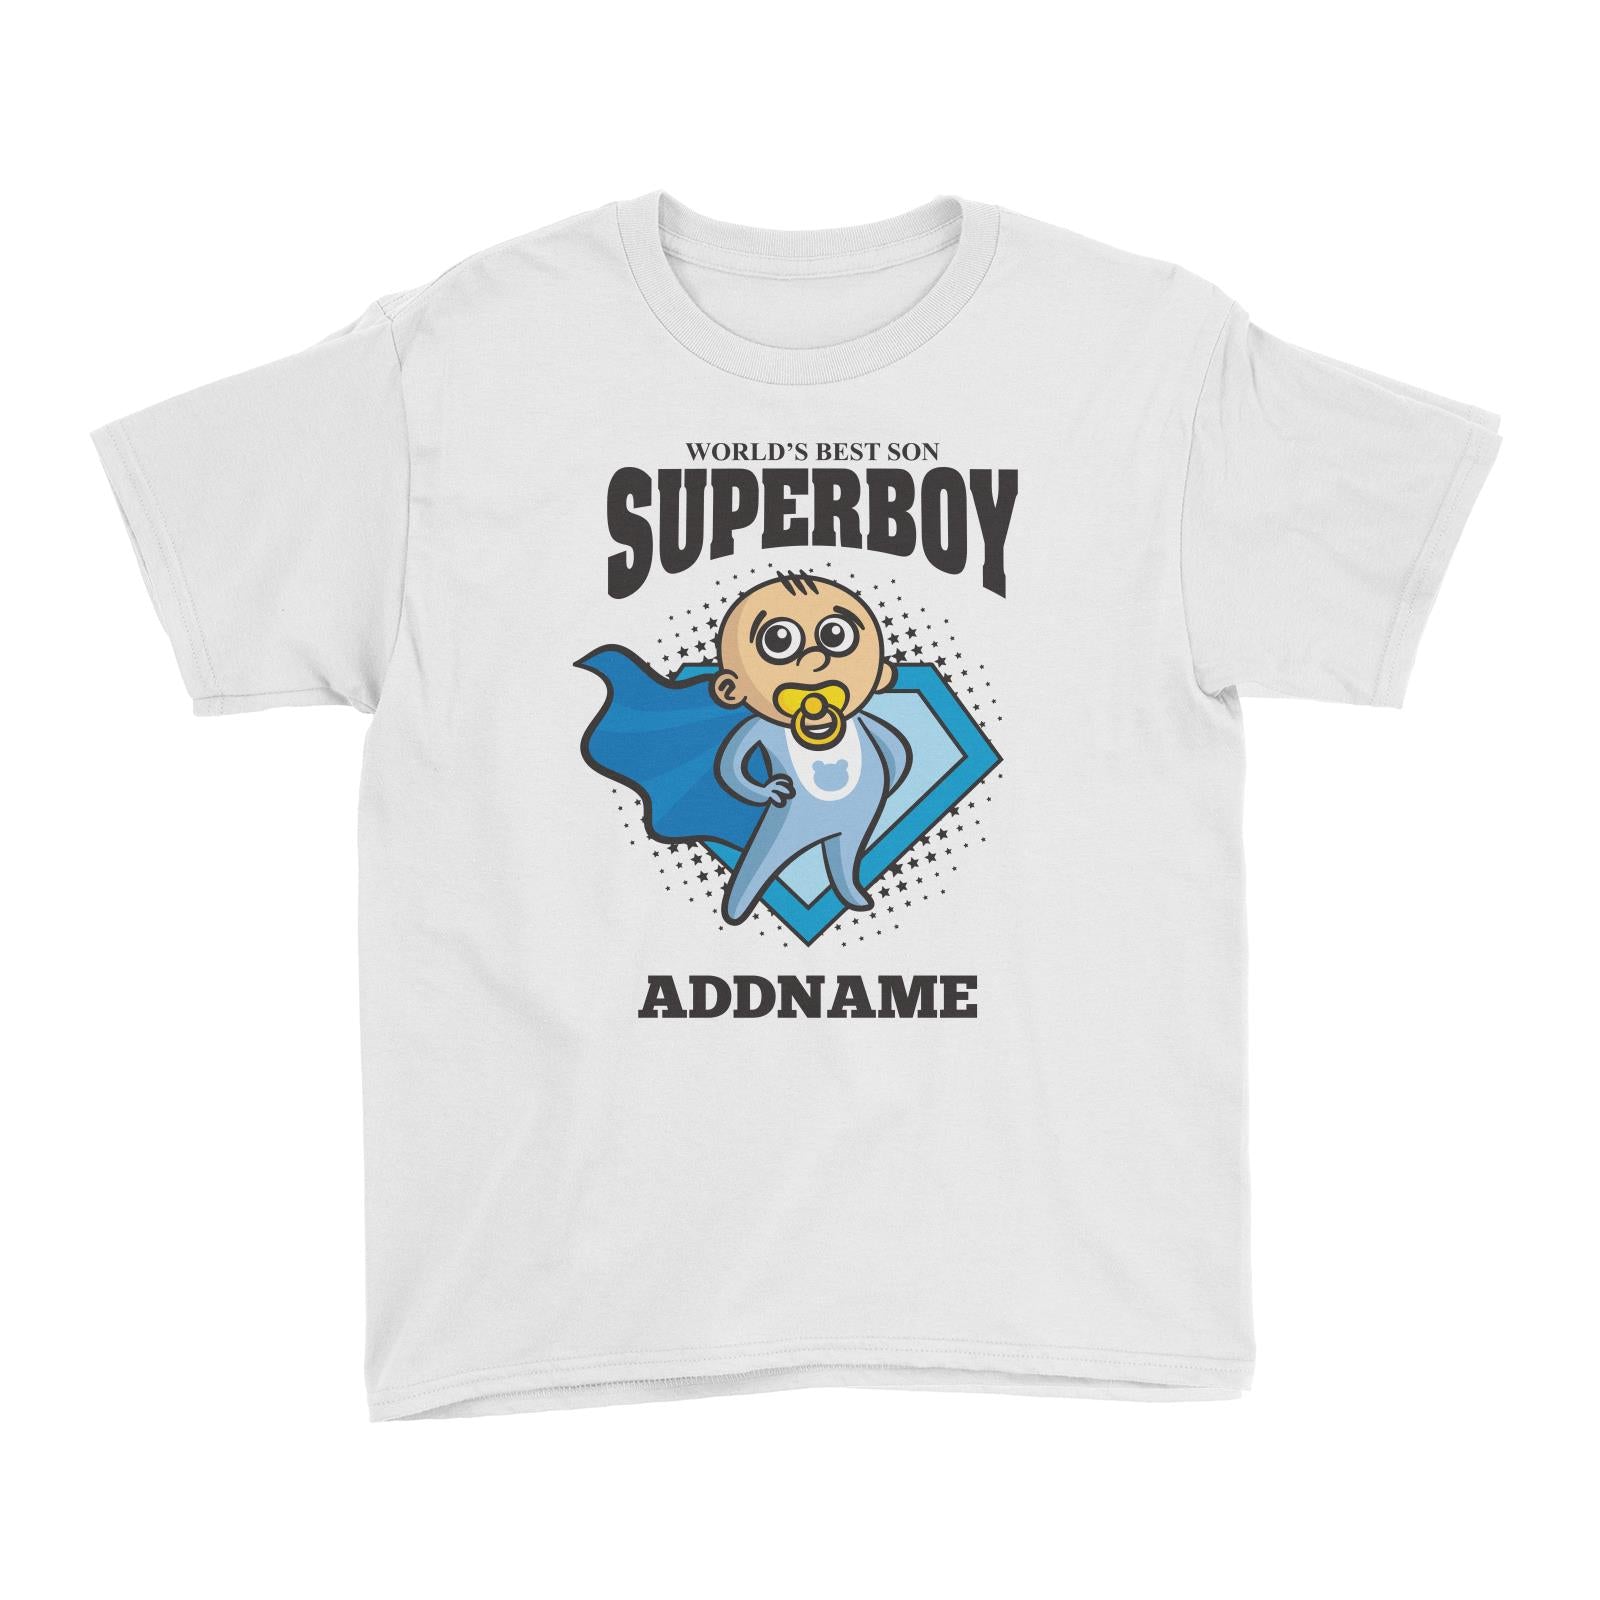 Best Son Superboy Baby Kid's T-Shirt Personalizable Designs Matching Family Superhero Family Edition Superhero